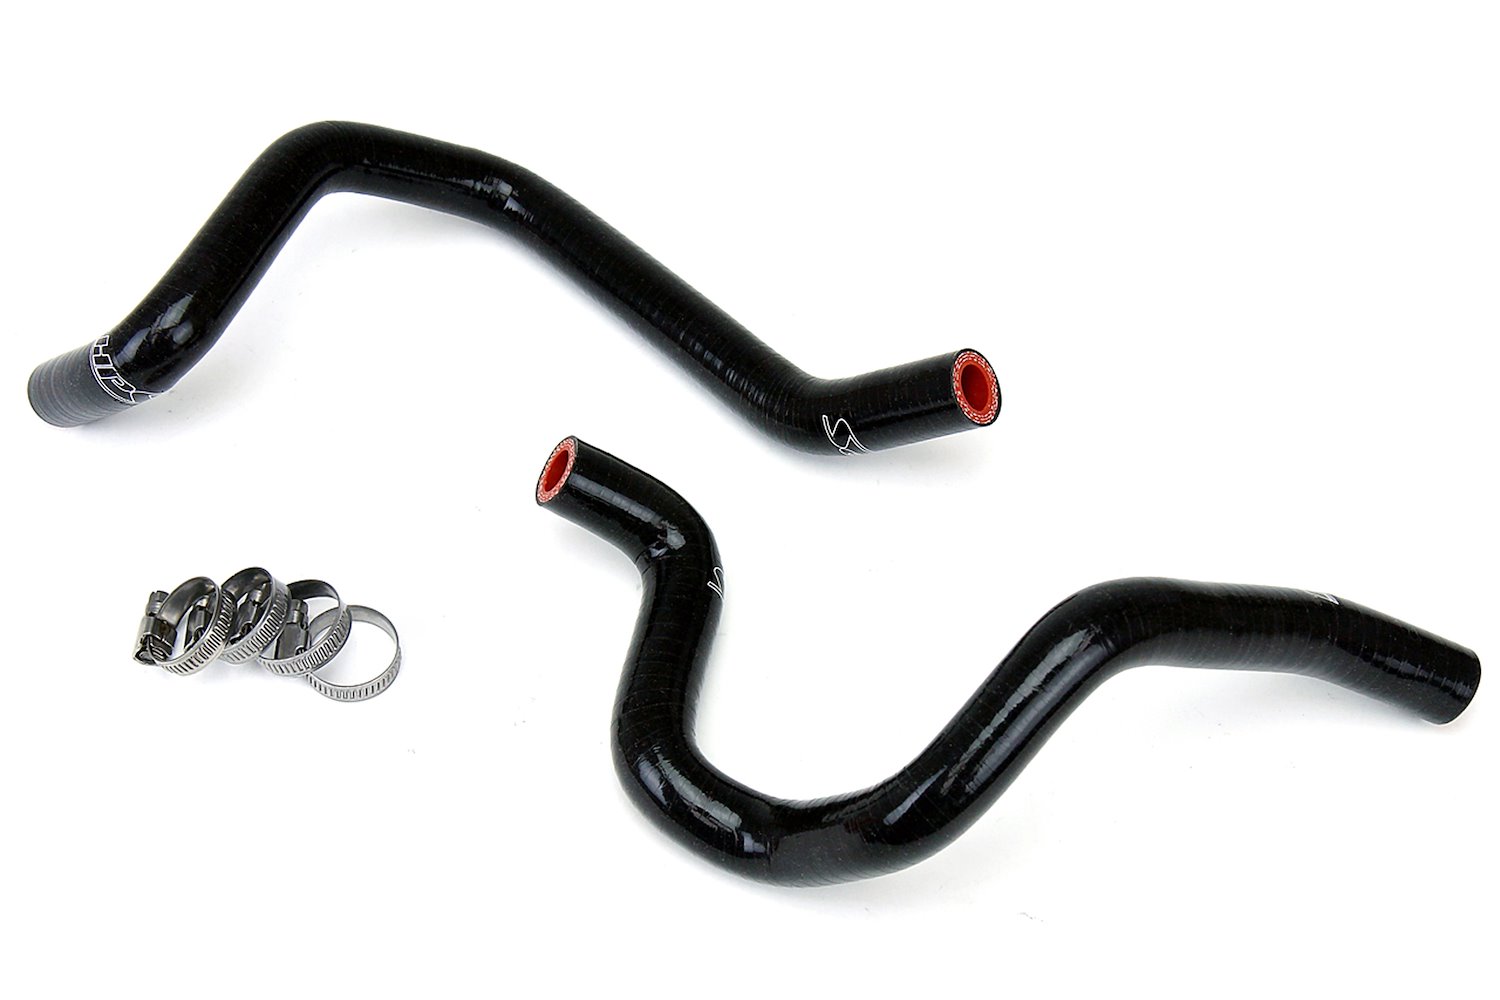 57-1804-BLK Heater Hose Kit, 3-Ply Reinforced Silicone, Replace OEM Rubber Heater Coolant Hoses